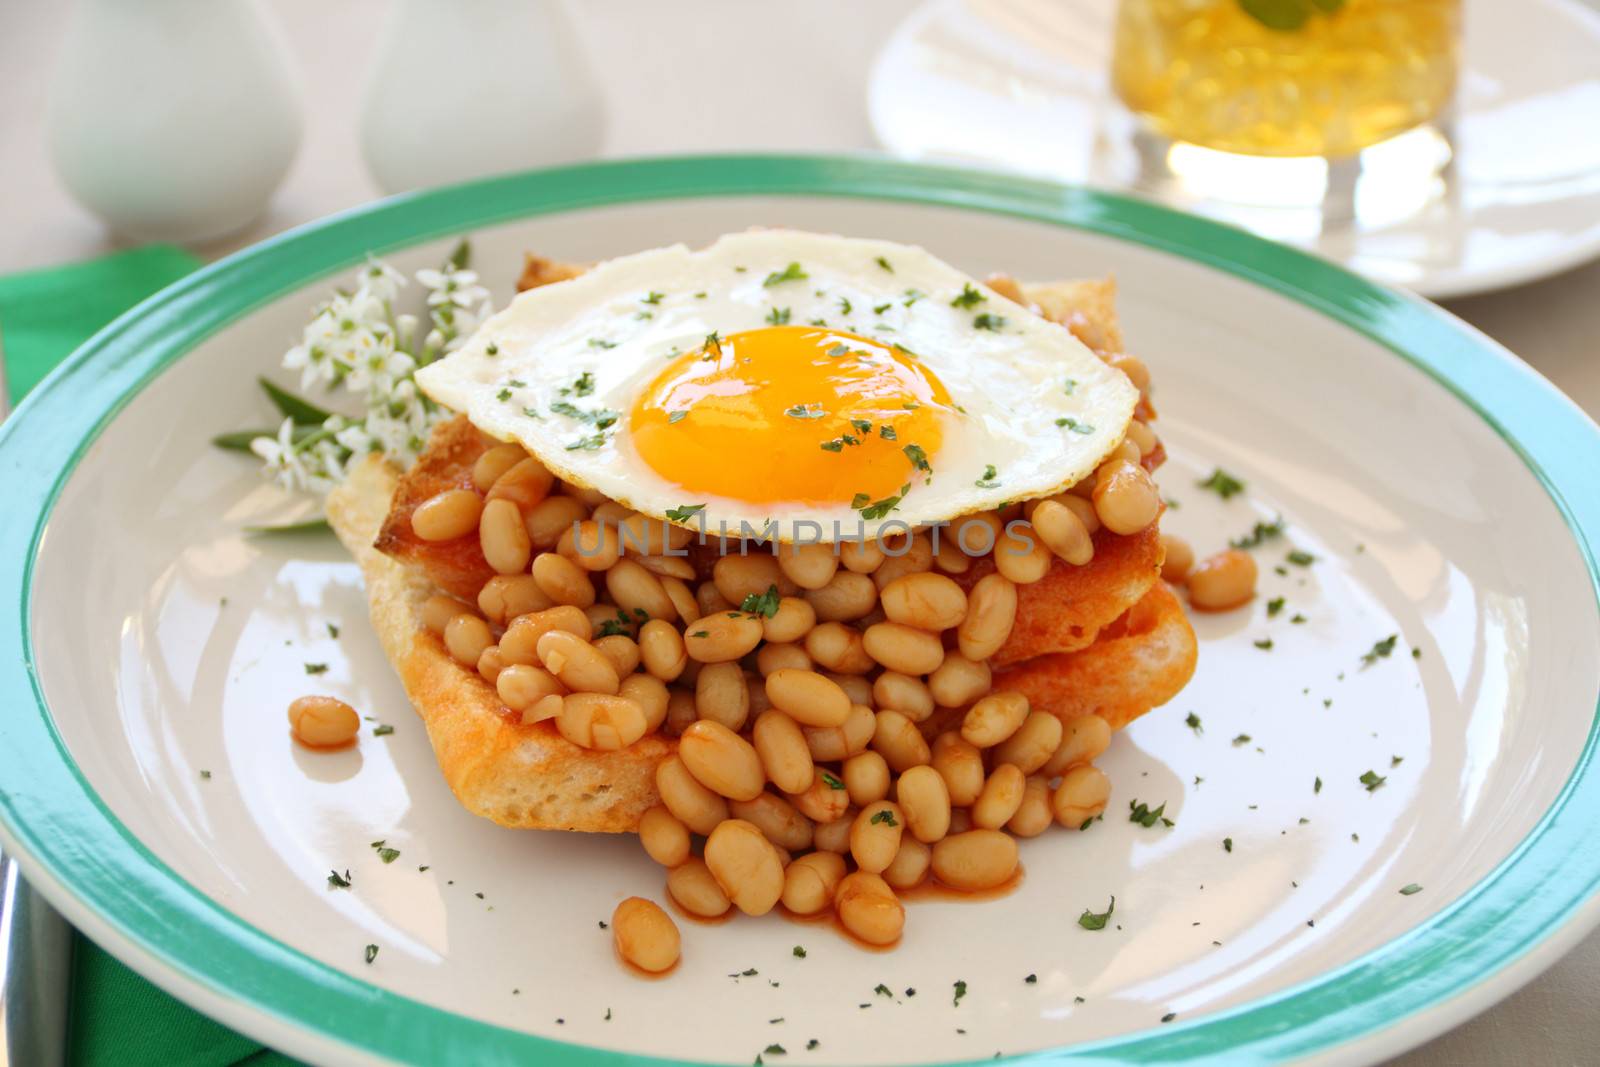 Delicious old fashioned breakfast of a fried egg on a baked beans stack on toast.